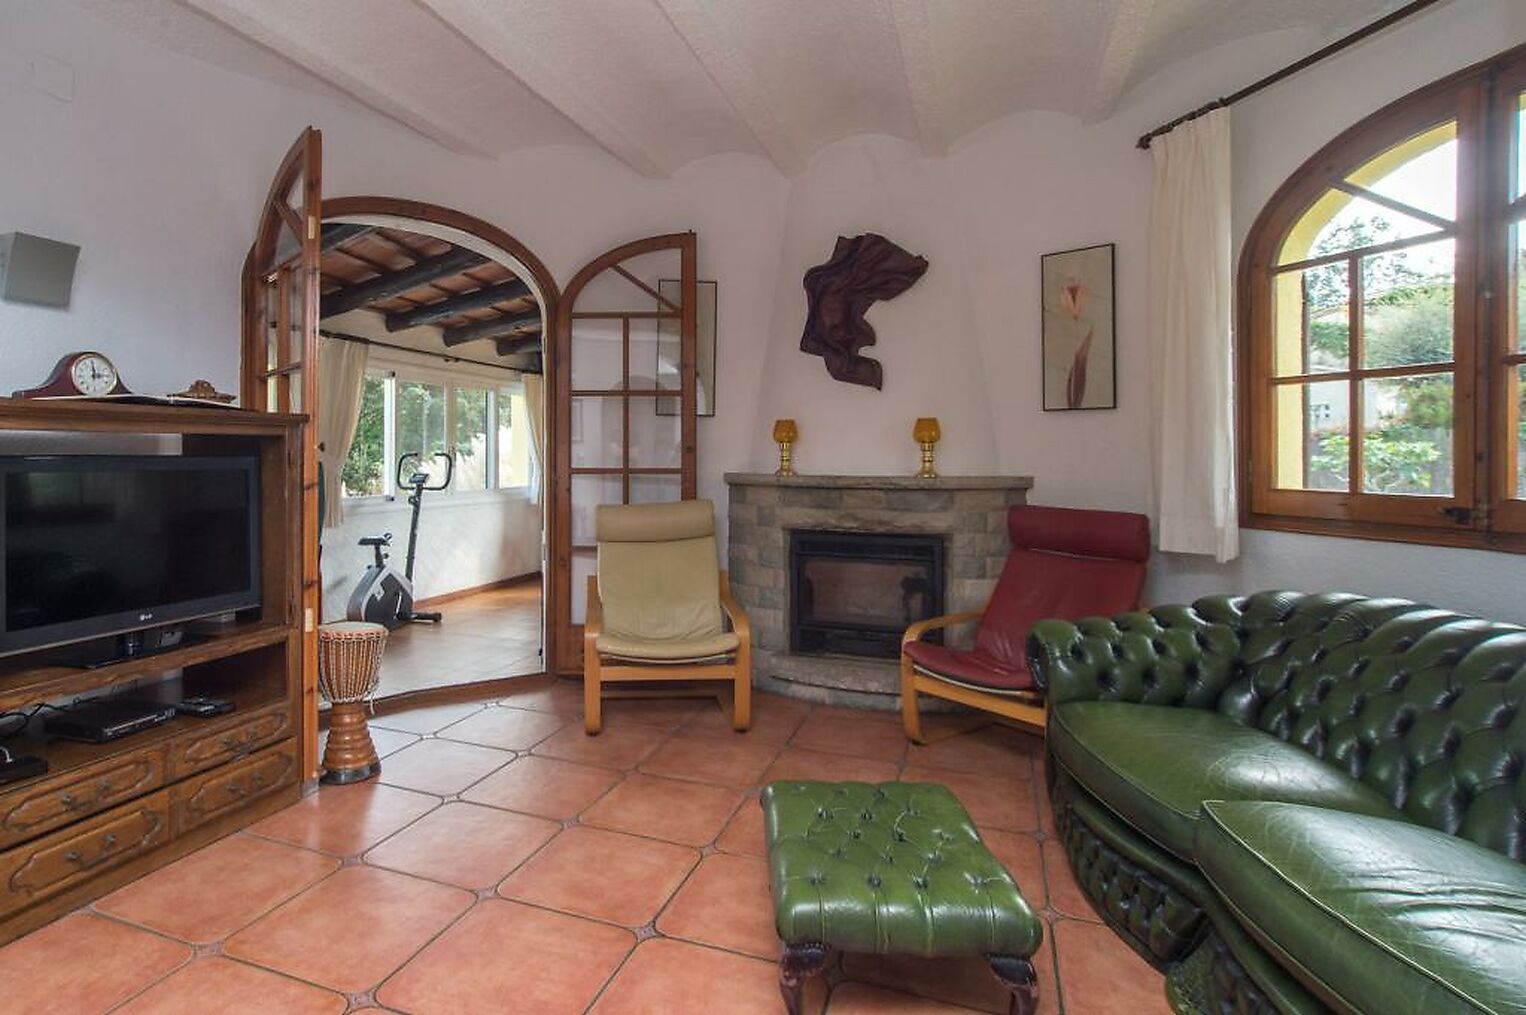 Detached villa set on a beautiful plot in a quiet residential area, just 10 mins drive to the beach.